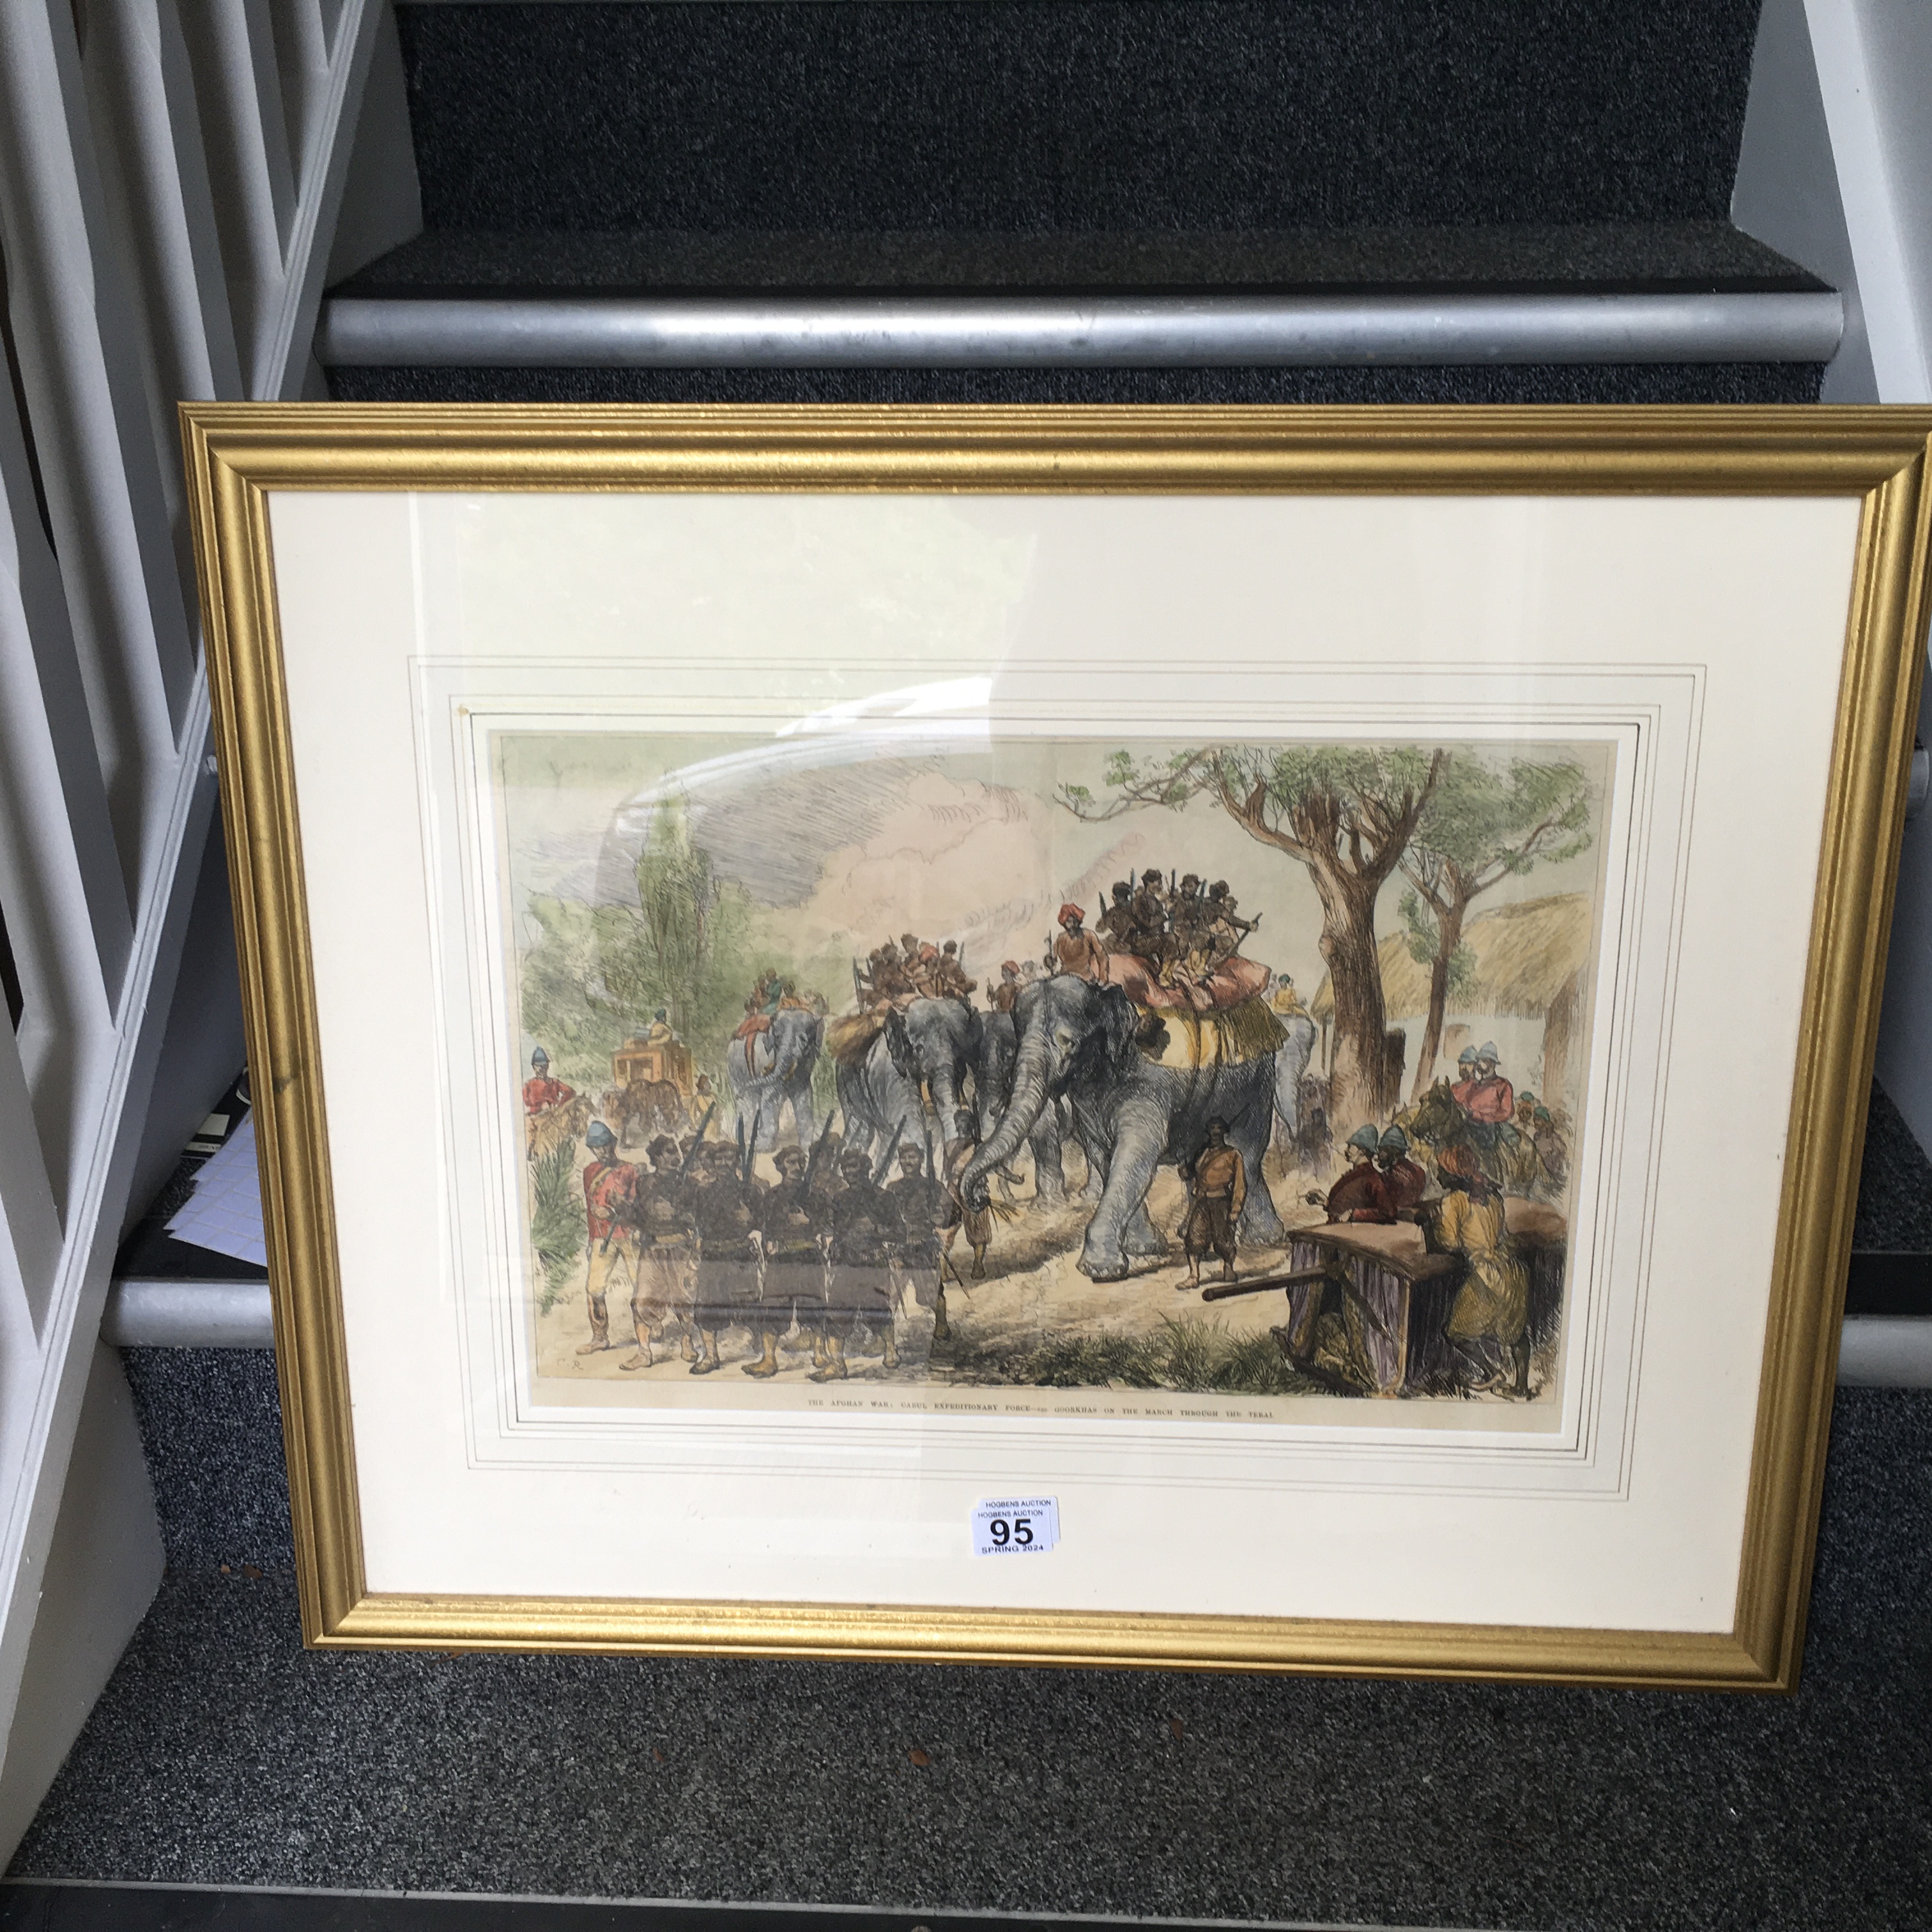 Framed and glazed hand coloured print The Afghan War, depicting soldiers, elephants and troops